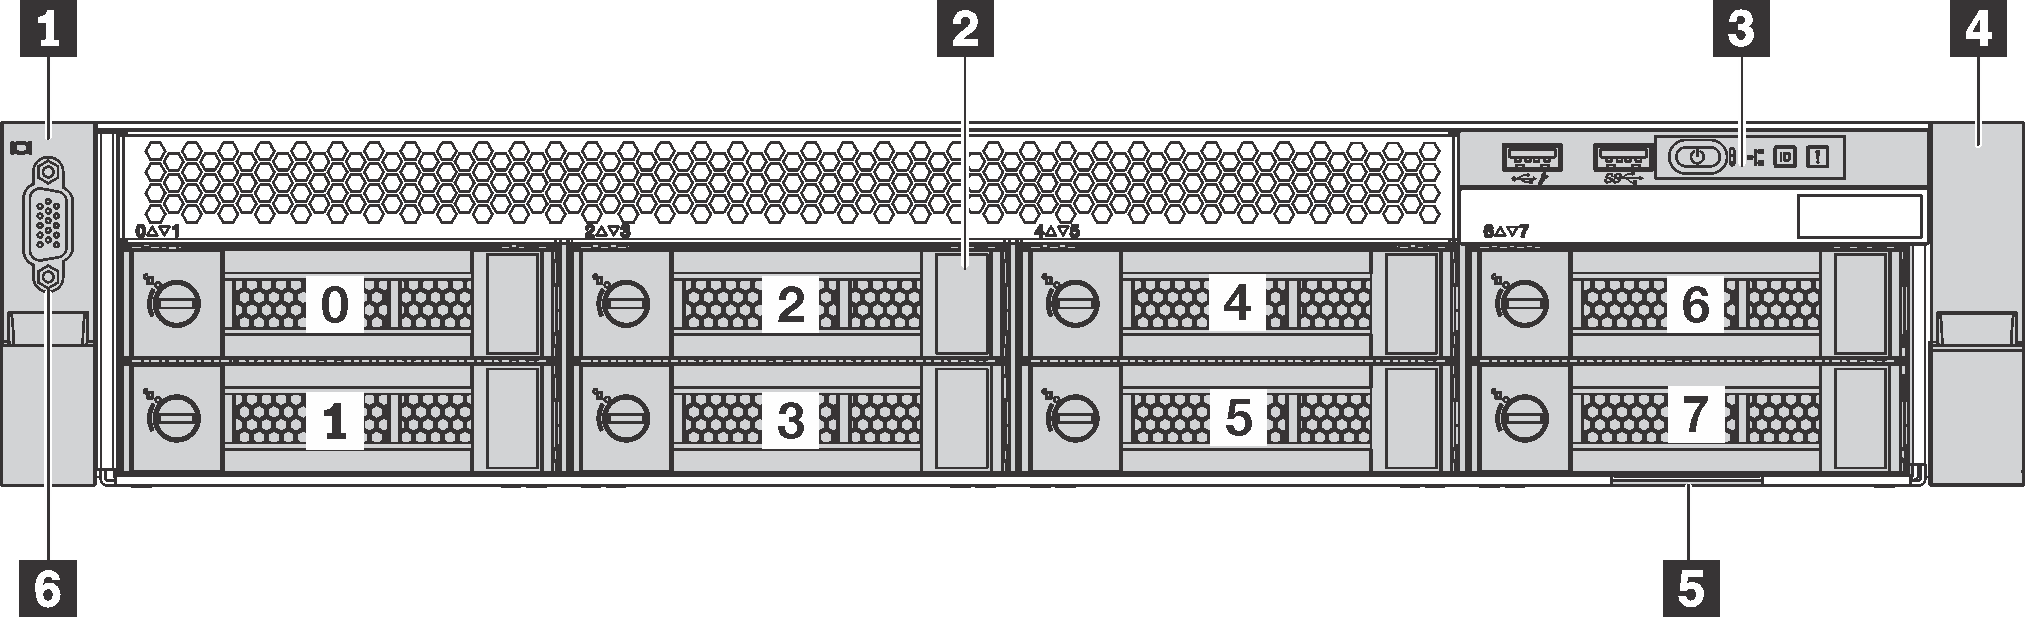 Front view of server models with eight 3.5-inch simple-swap drives (0-7)